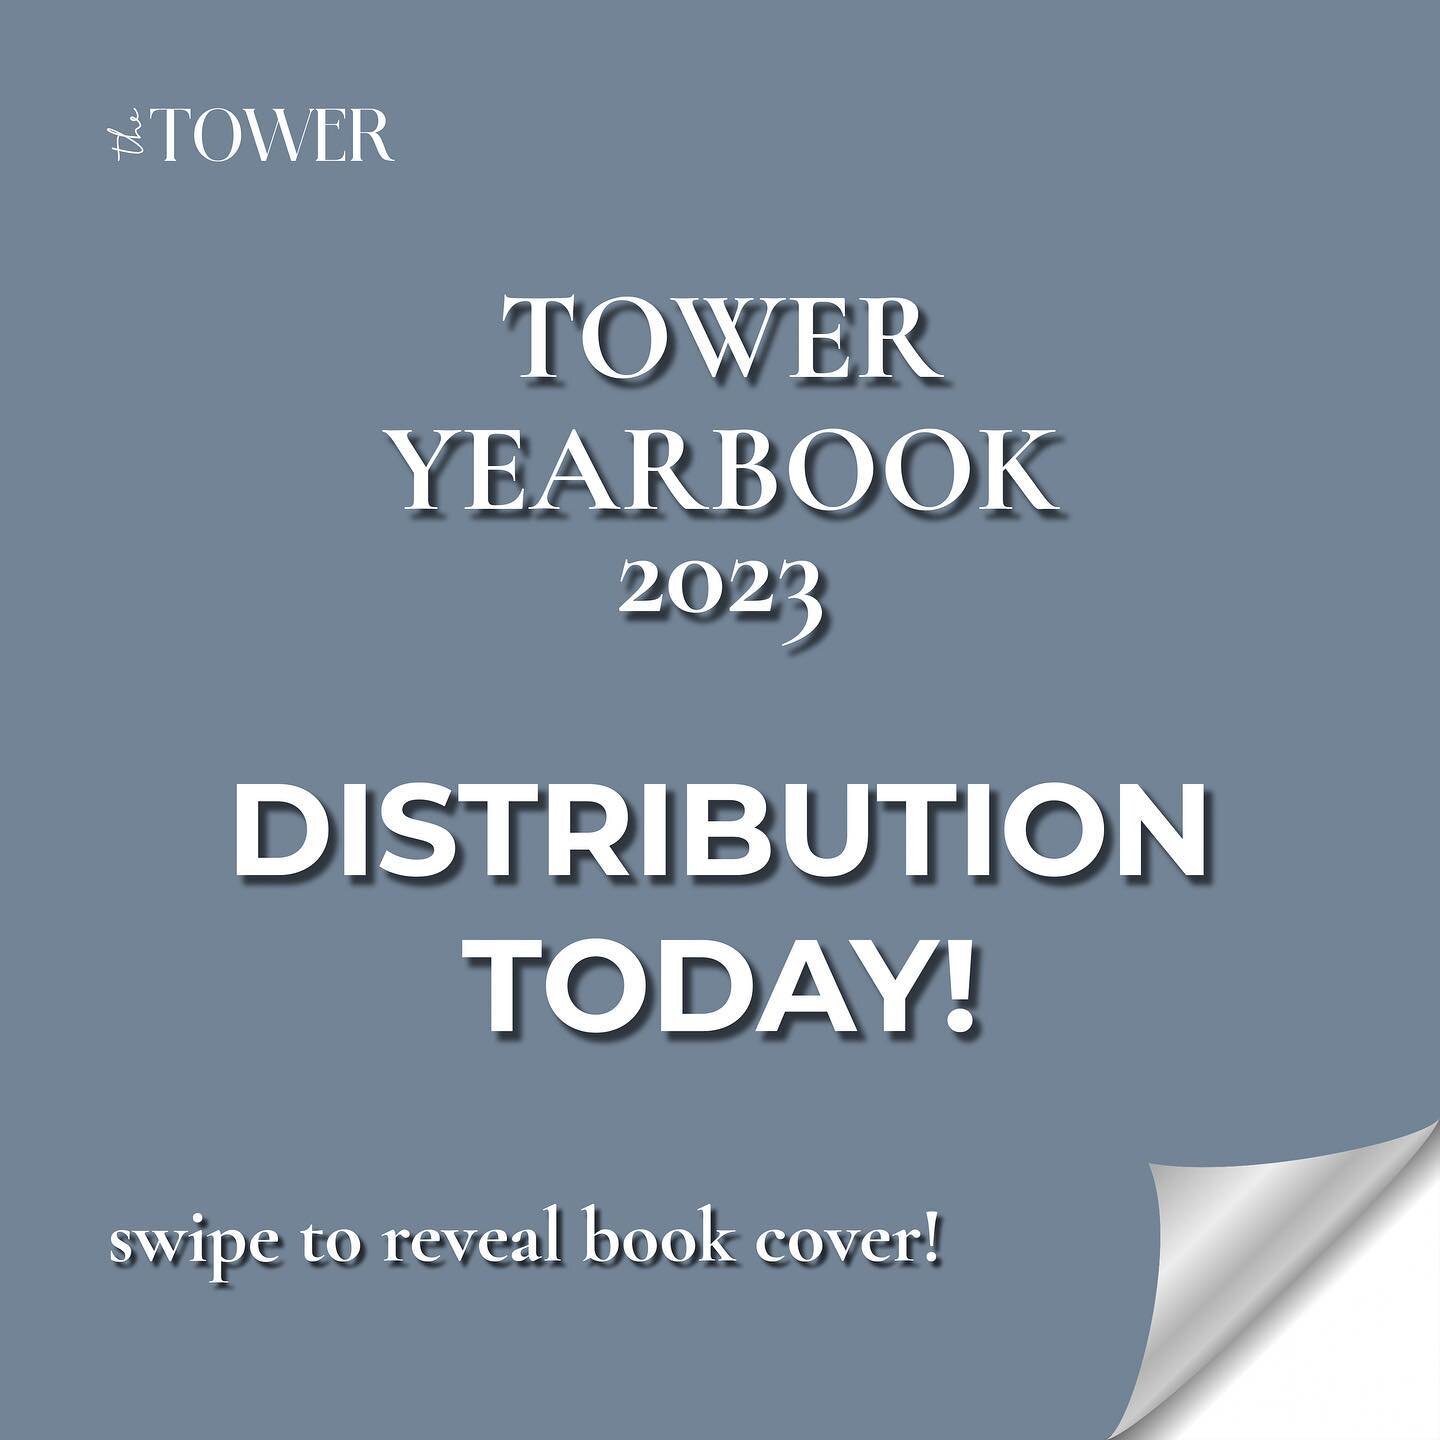 IT&rsquo;S FINALLY HERE! Introducing the Tower 2023 Yearbook!!

You can pick up your FREE copy of the yearbook starting today! We will be in Alumni Mall from 11:30 am - 1:30 pm! Feel free to DM us if you have any questions.

For more information abou